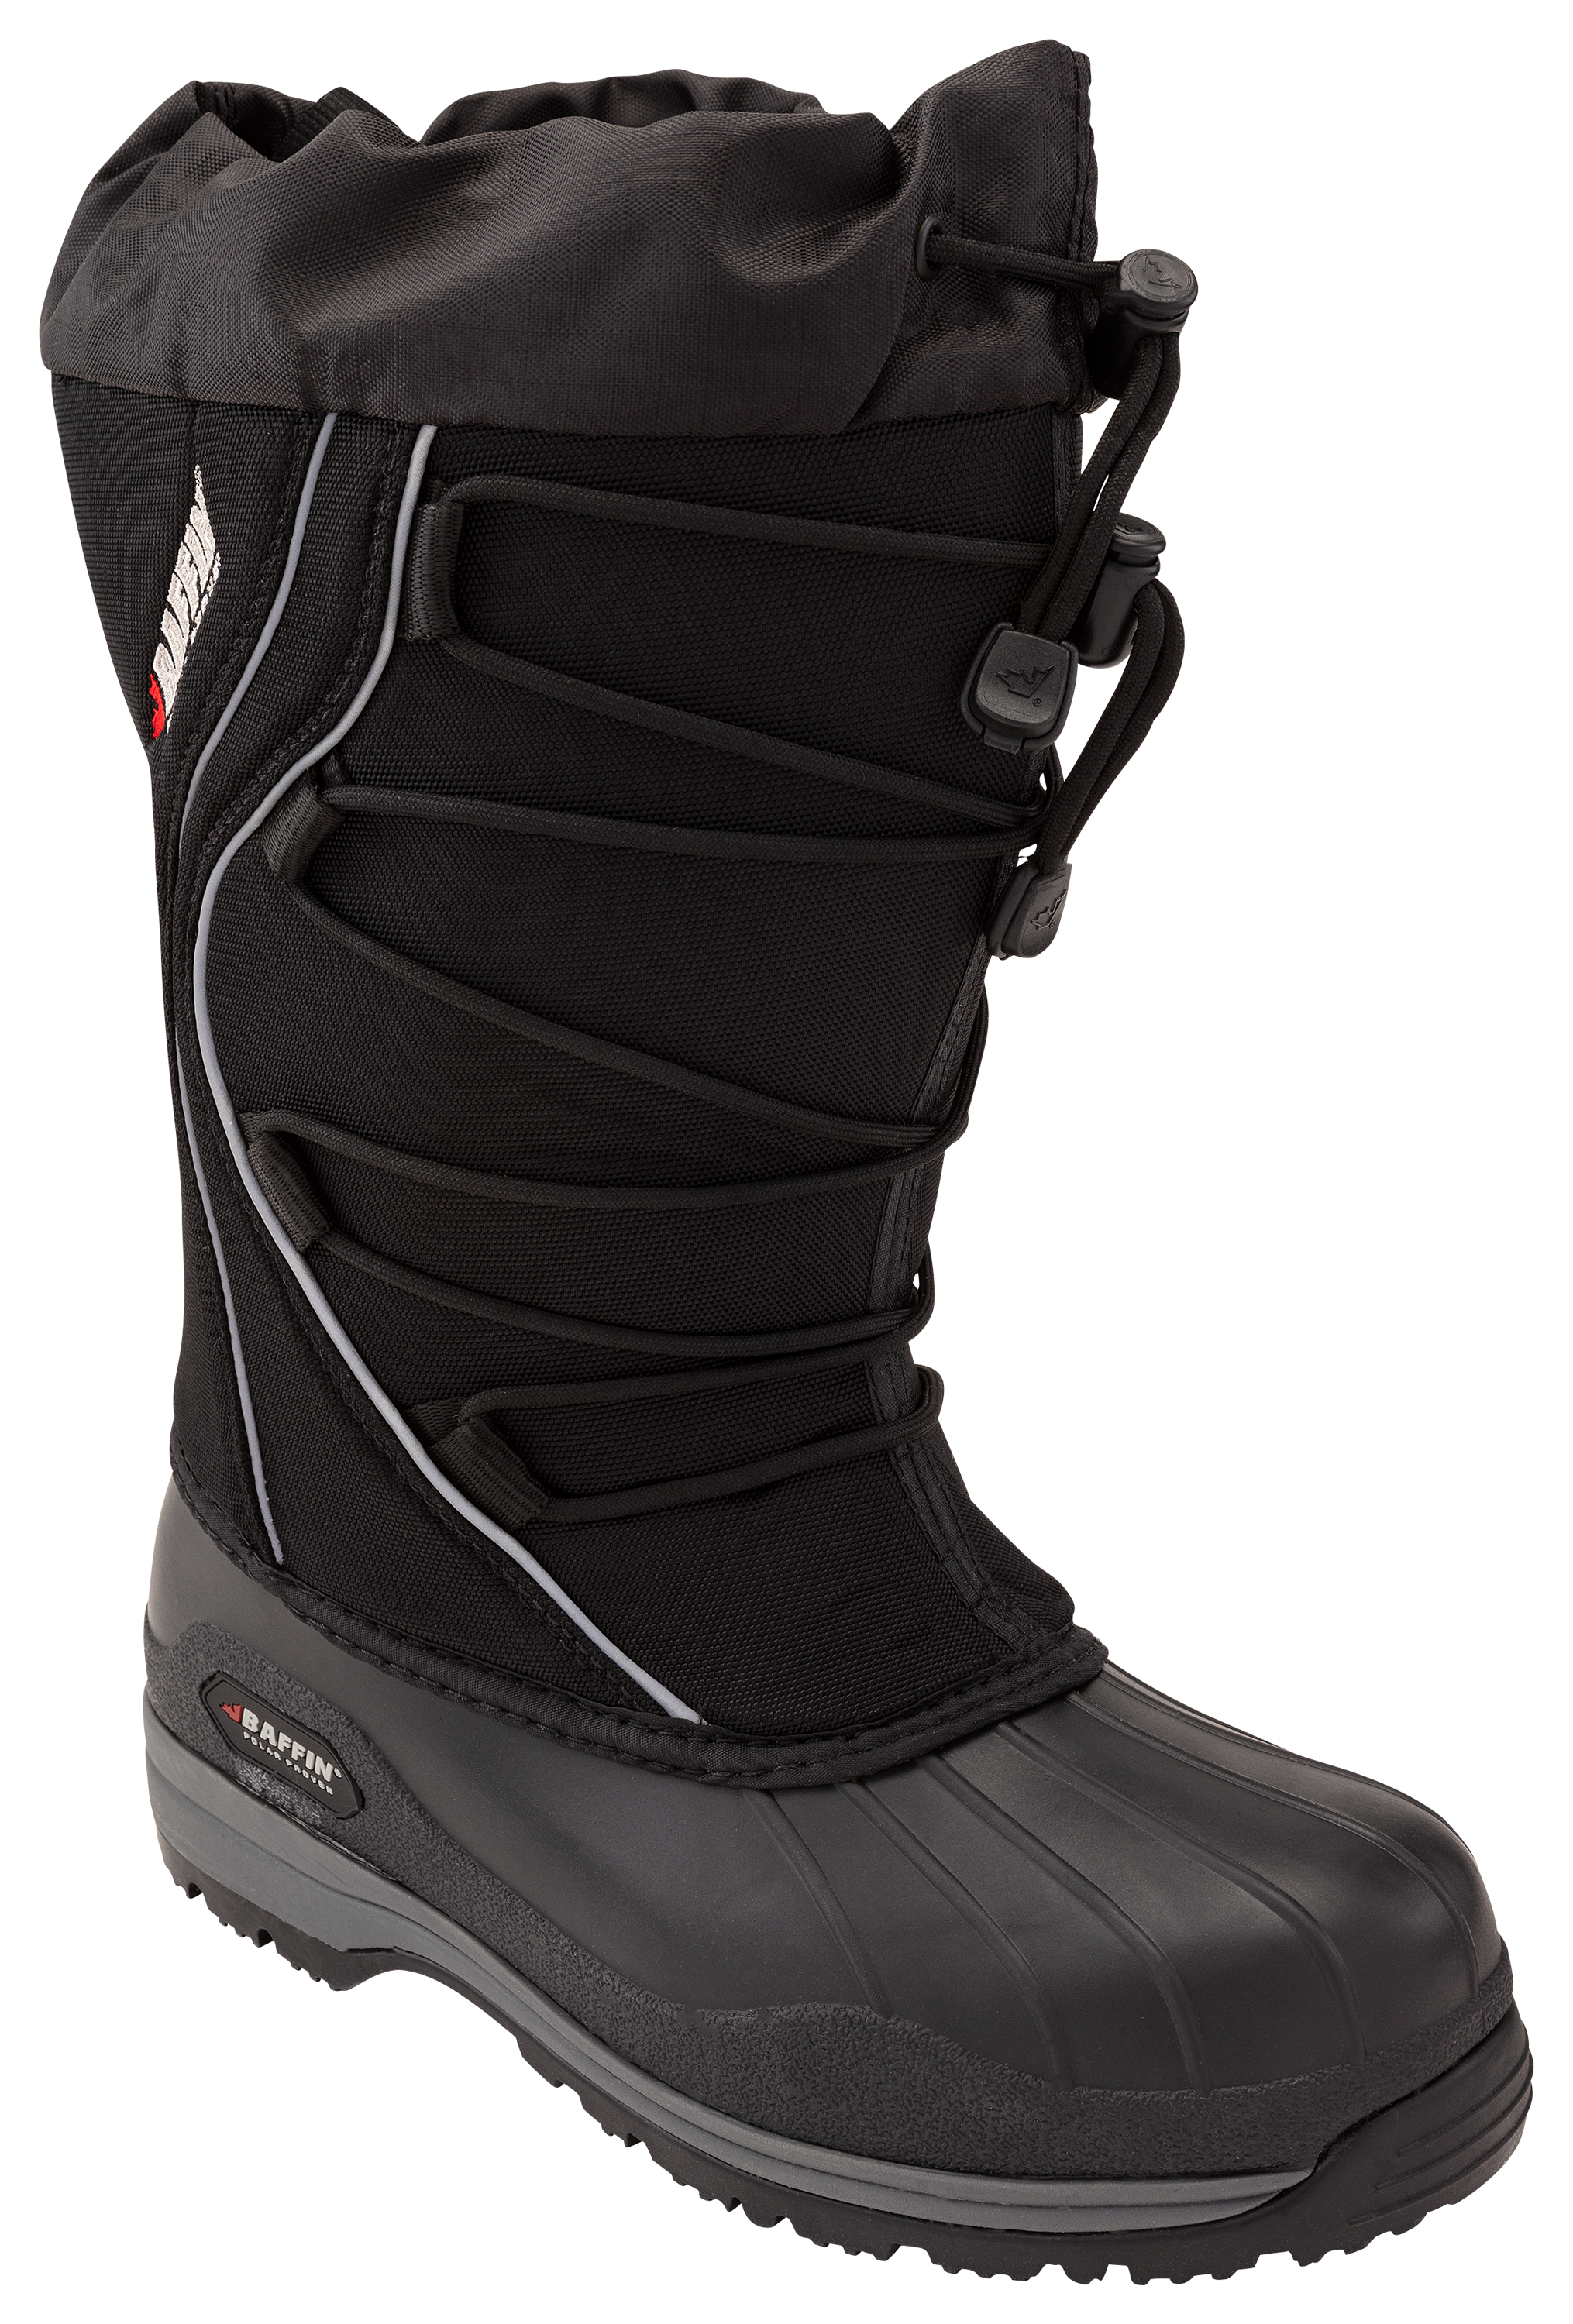 Baffin Icefield Pac Boots for Ladies - Black - 8M